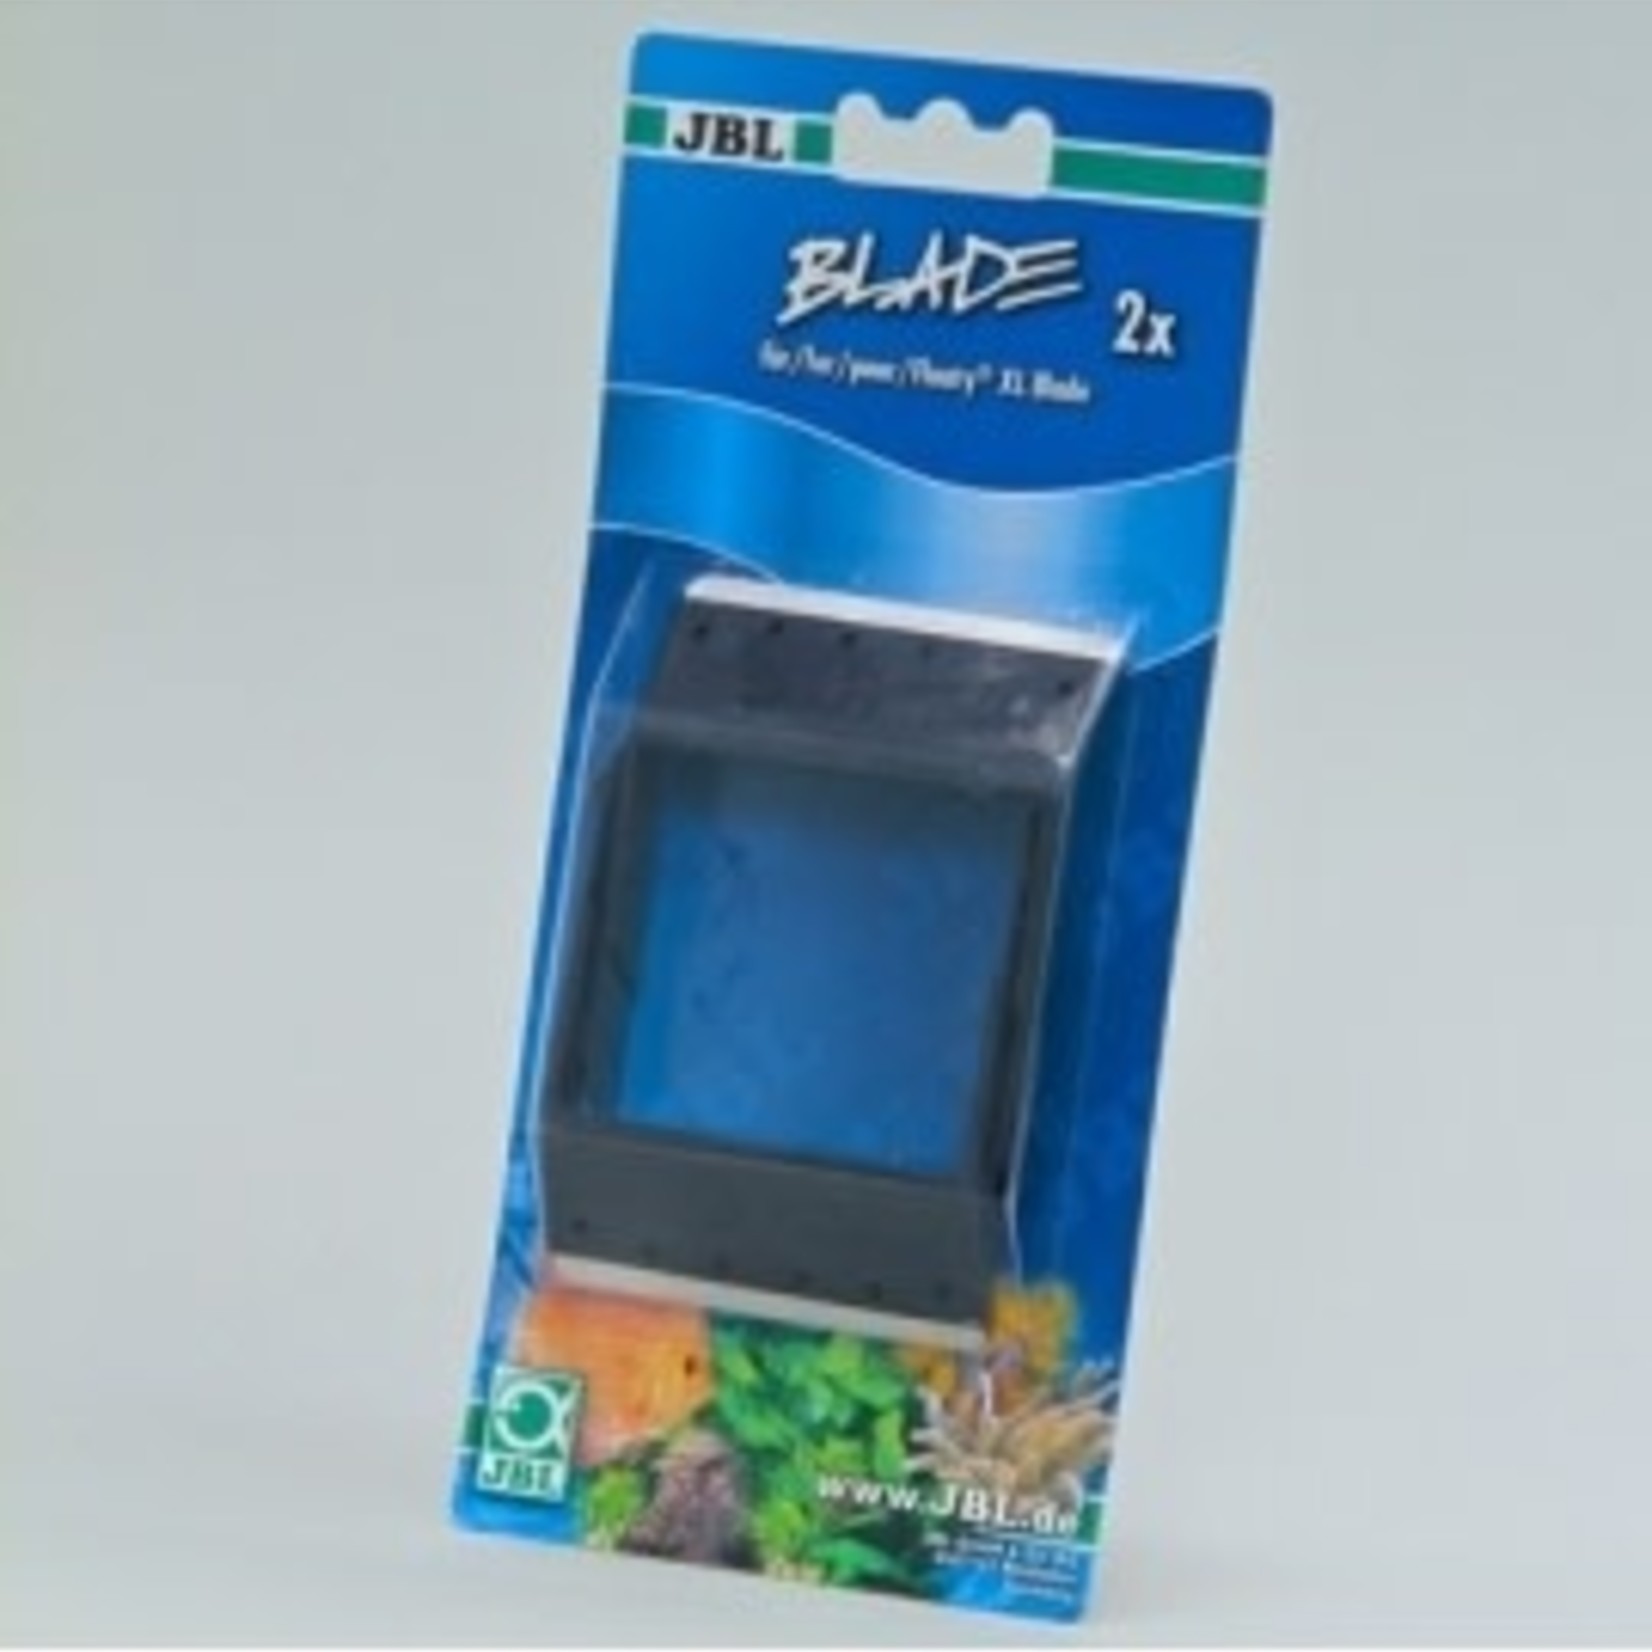 JBL Floaty Blade Magnet - Replacement Blades L / XL 2p